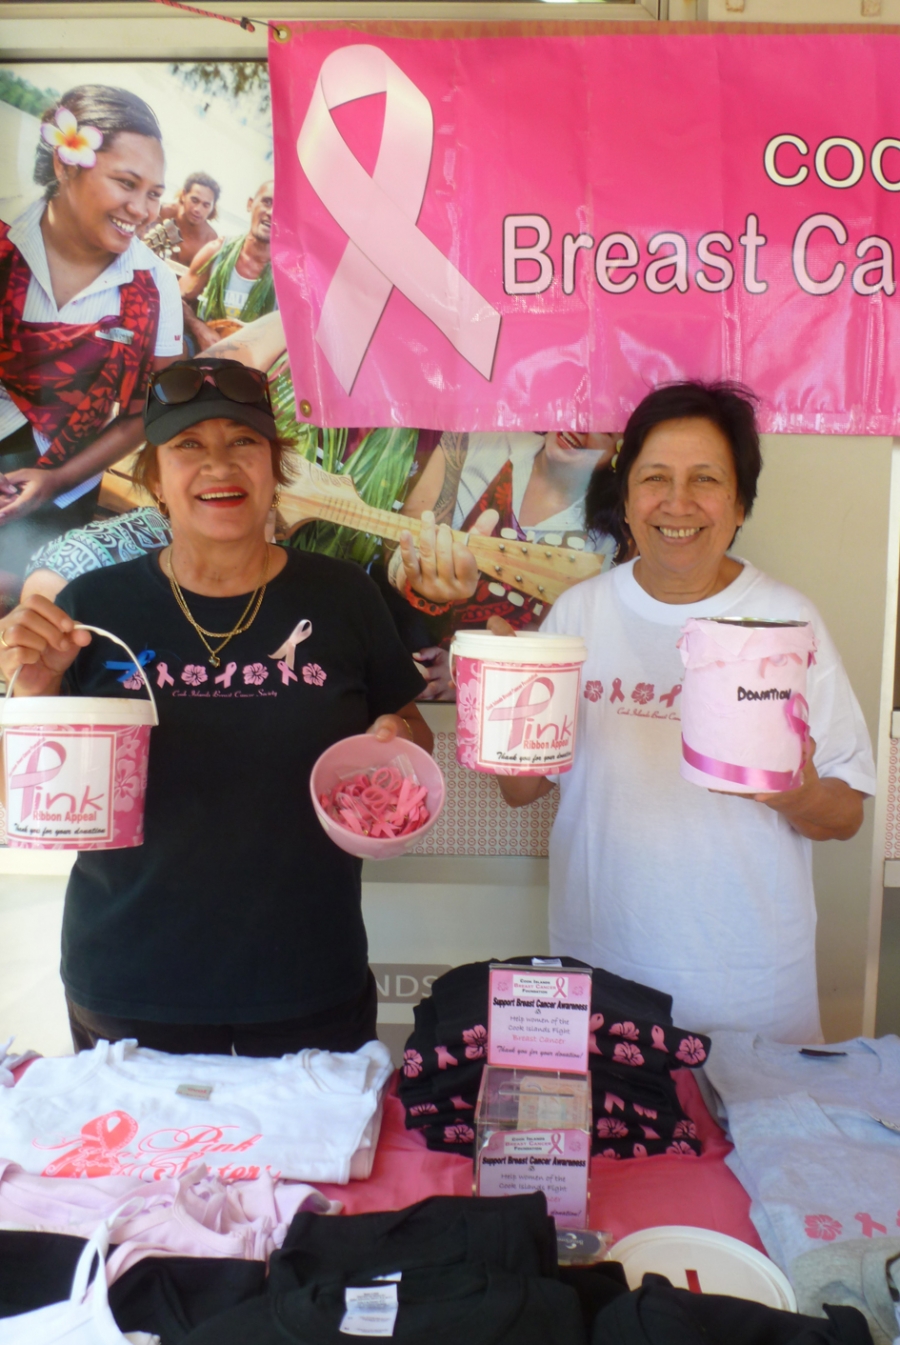 Cook Islands Breast Cancer Foundation gears up for Awareness Month